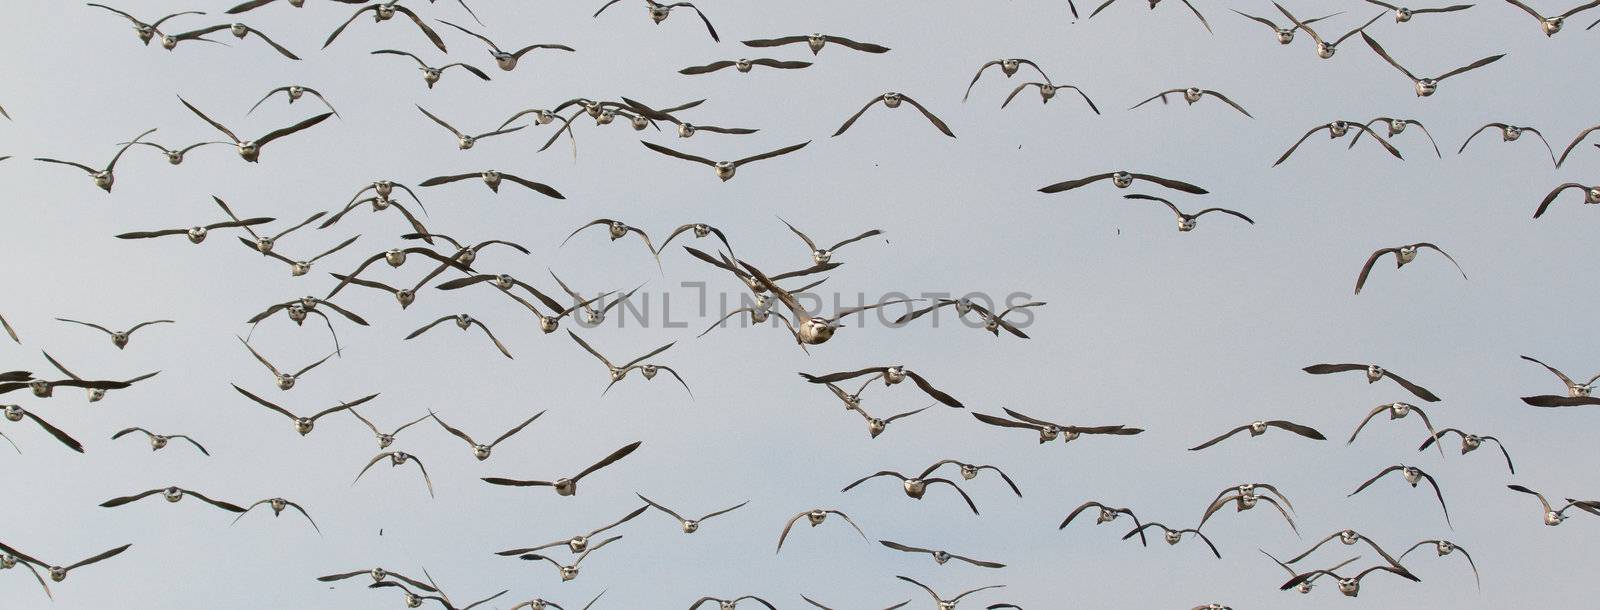 A group of Brent geese in flight